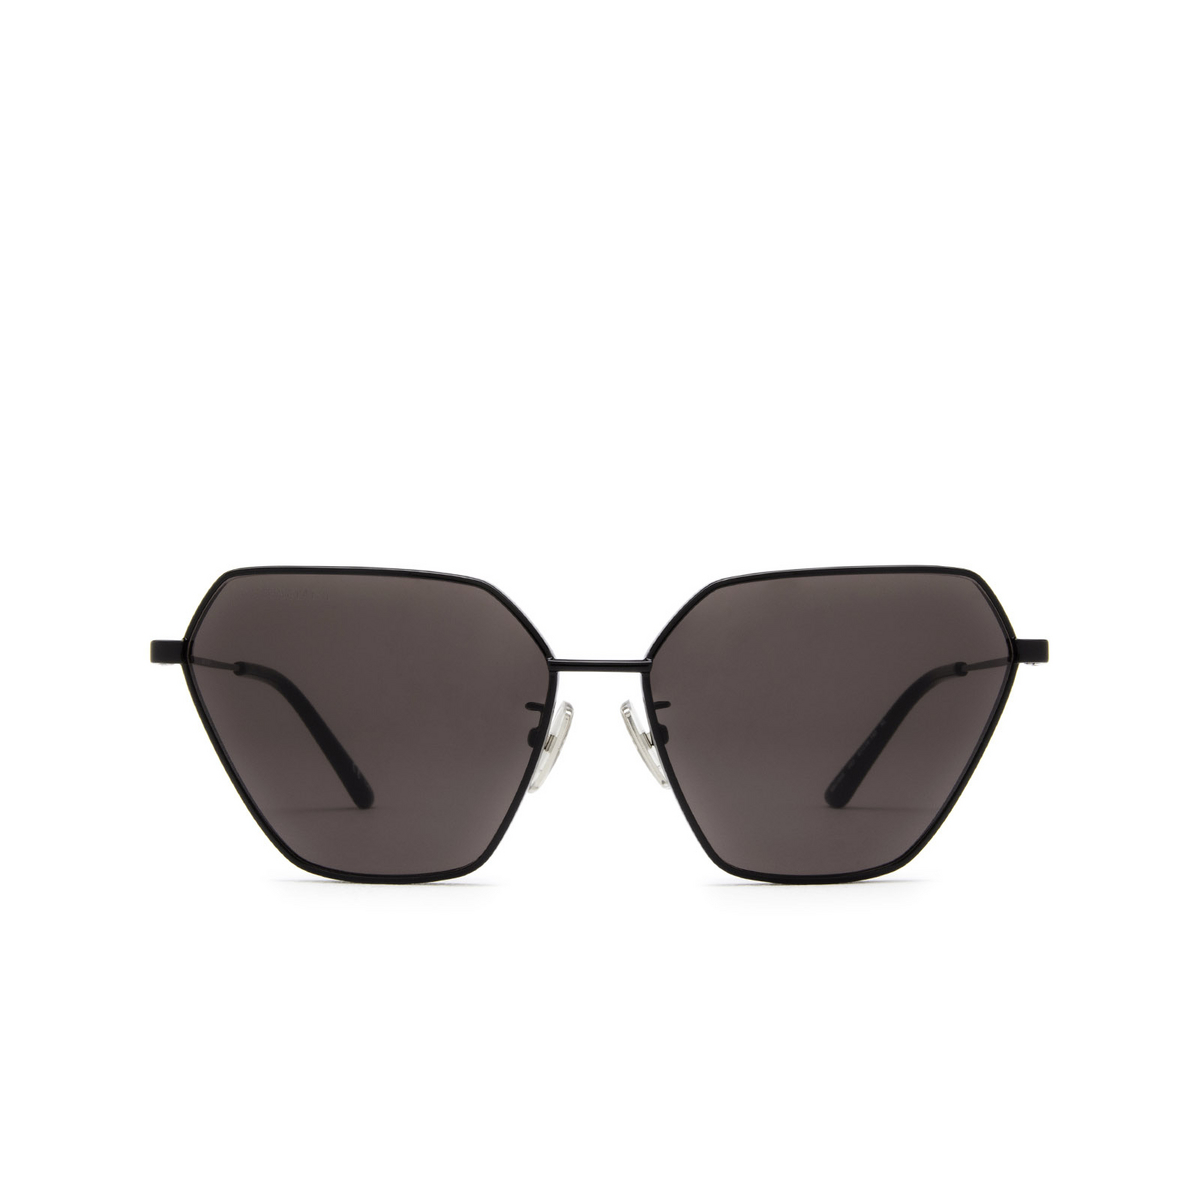 Balenciaga® Butterfly Sunglasses: BB0194S color Black 001 - front view.